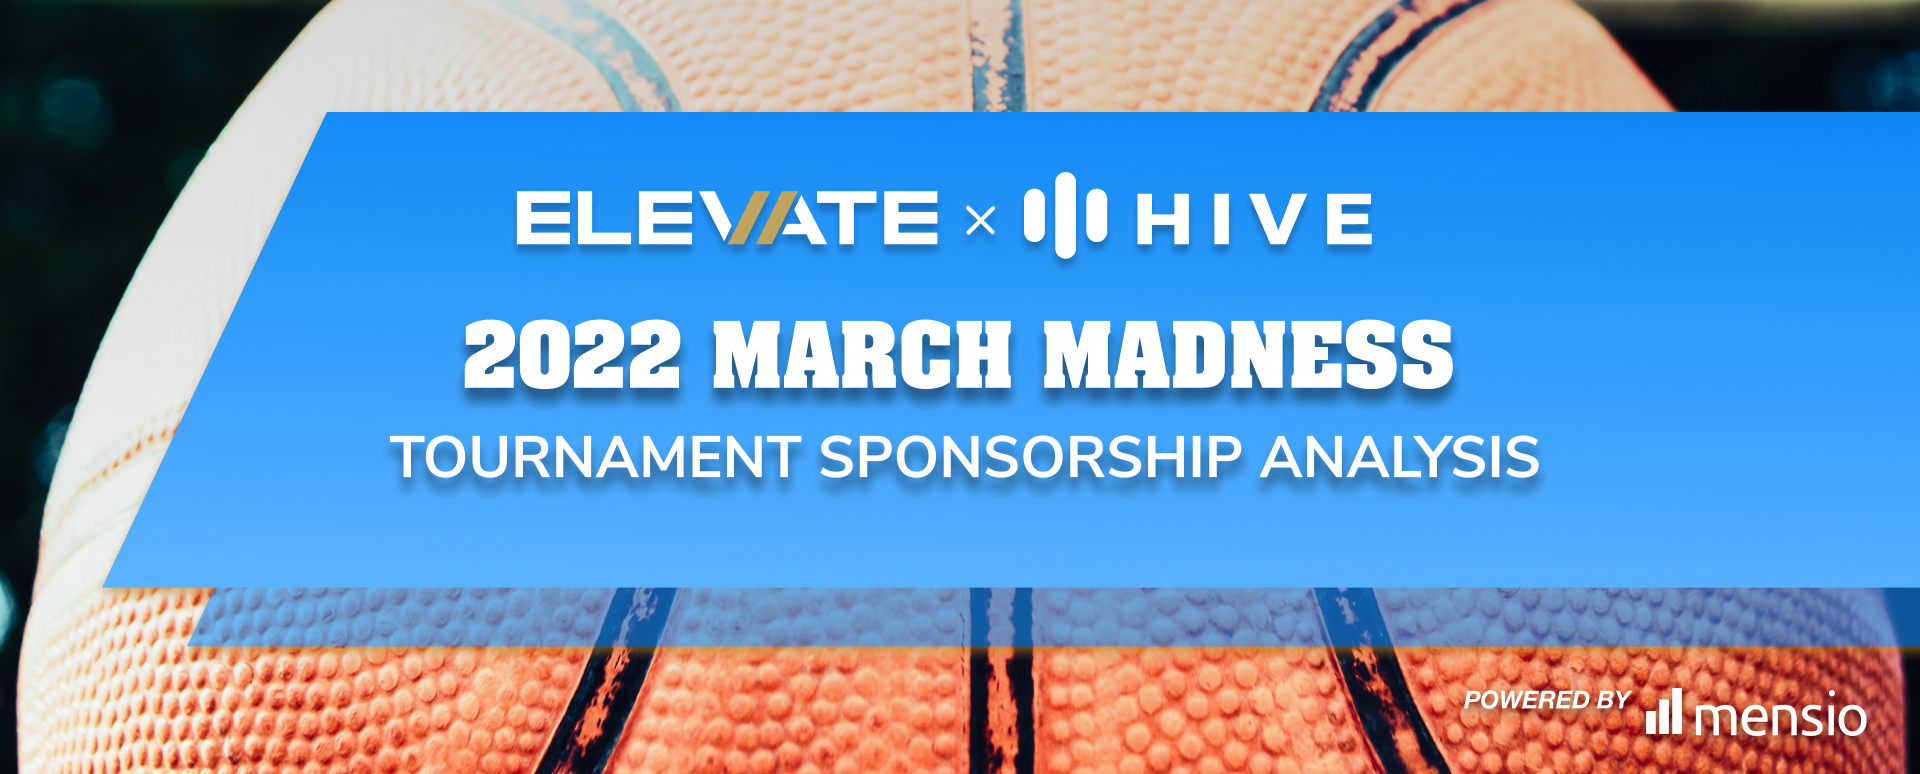 2022 March Madness Sponsors Generate Over 410M in Media Value Blog